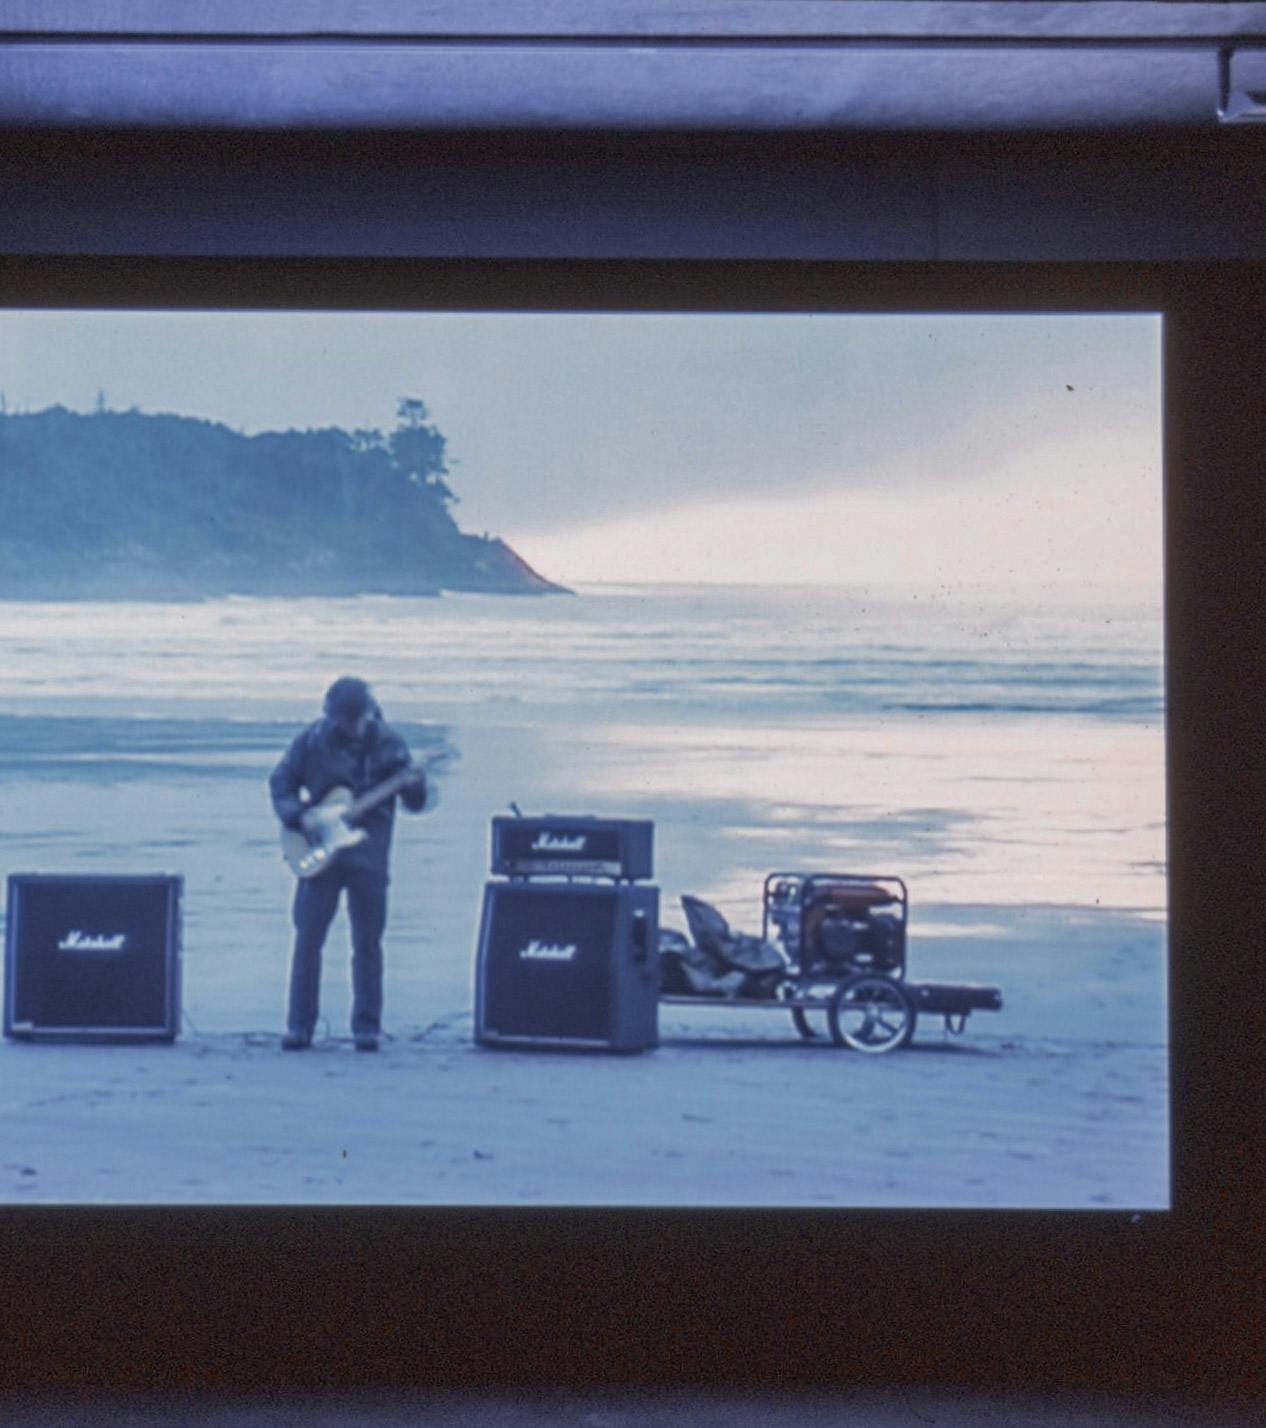 A single-channel video is projected on the wall inside a darkened gallery space. The video depicts a person playing a guitar on a seashore. The blue ocean is visible behind the person. 